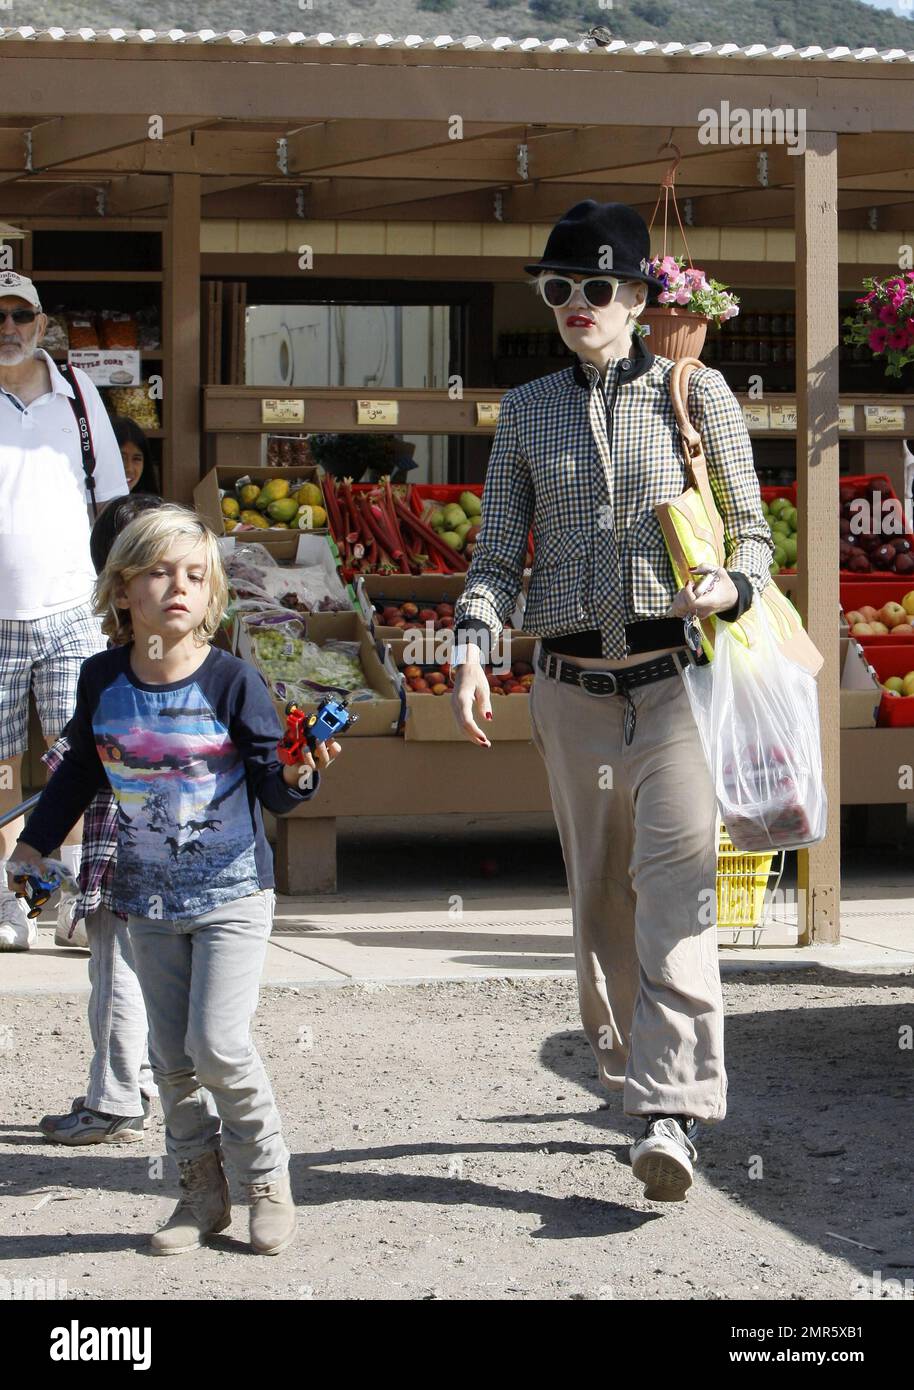 'No Doubt' singer and fashion designer Gwen Stefani takes her sons, 6 year old Kingston and 4 year old Zuma for a family day out at Underwood Family Farms in L.A. 42 year old Gwen wore a tan plaid jacket with baggy tan pants and topped off with a black hat, black sneakers and sunglasses as she is seen carrying three boxes of strawberries she purchased at the farm. Kingston is seen enjoying a pony ride and riding a giant tricycle. Los Angeles, CA. 26th May 2012. Stock Photo